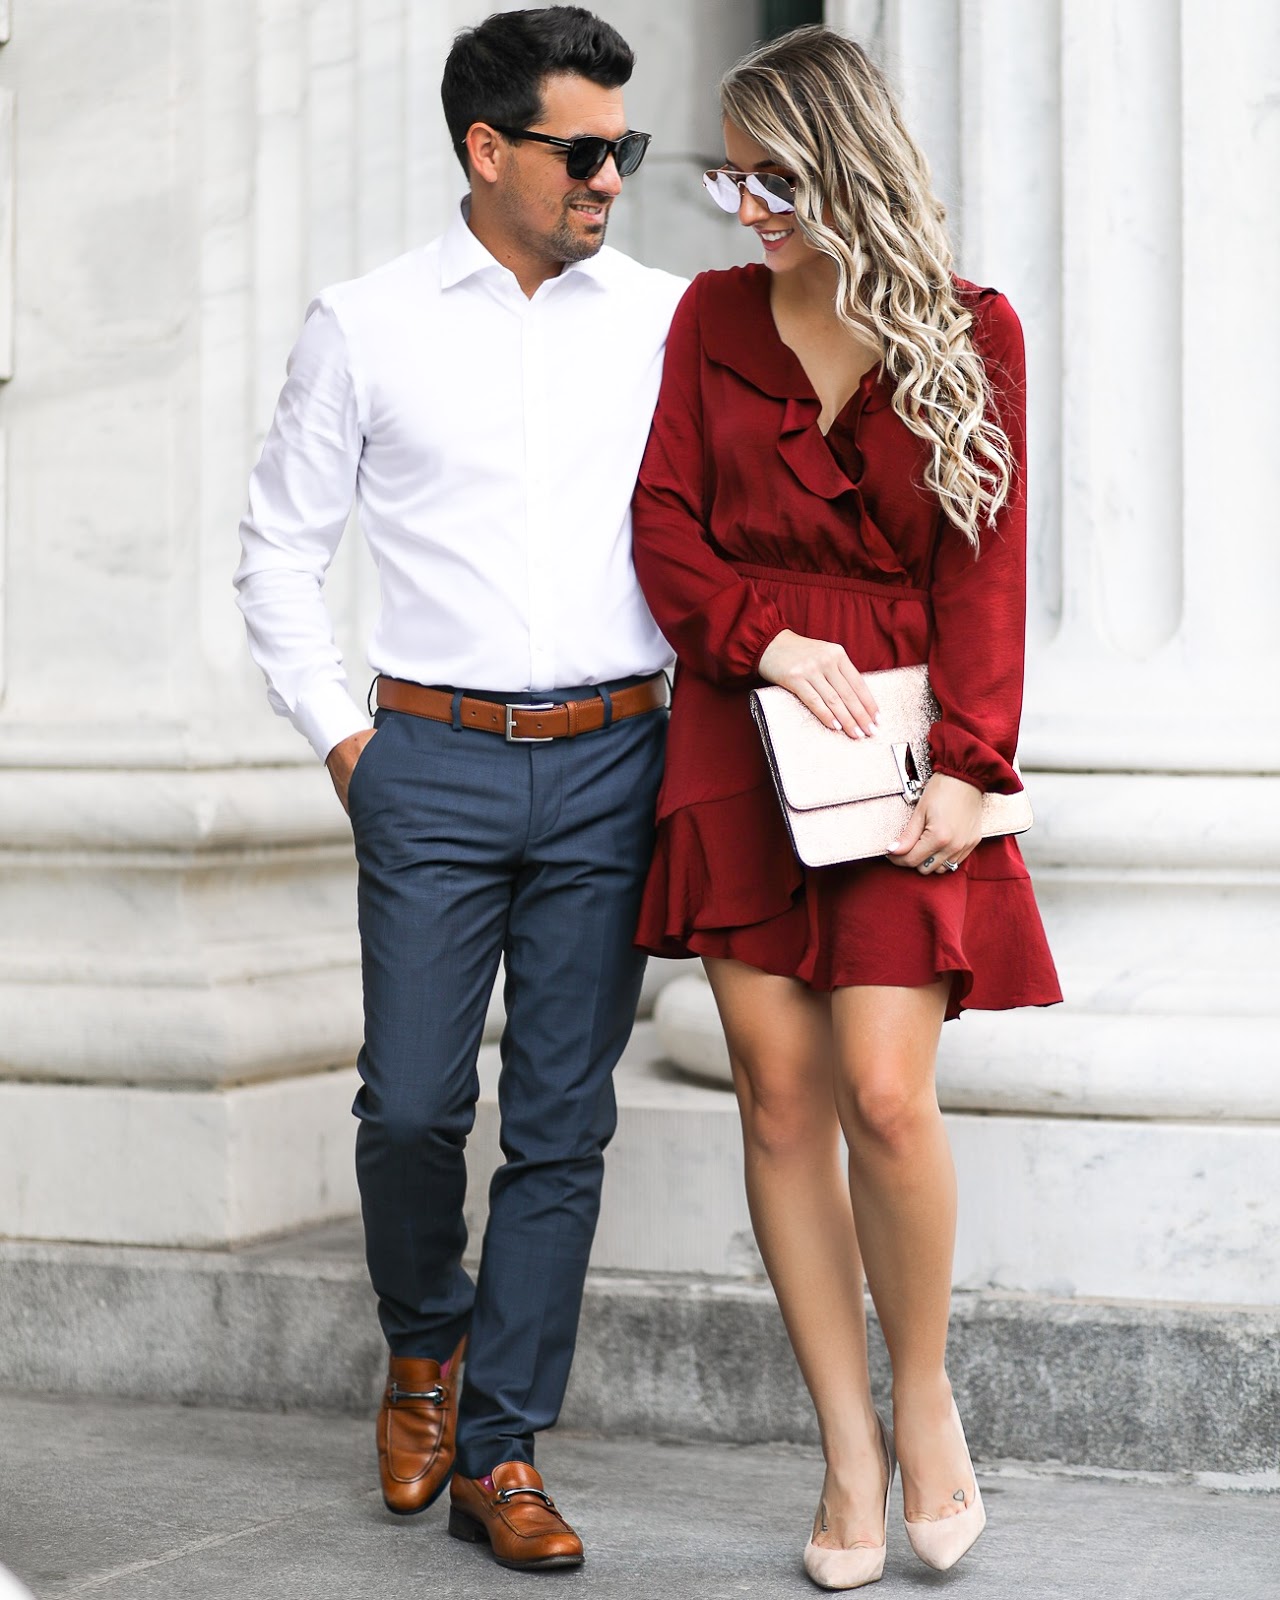 His & Hers: Casual Date Night Style - Laura Beverlin